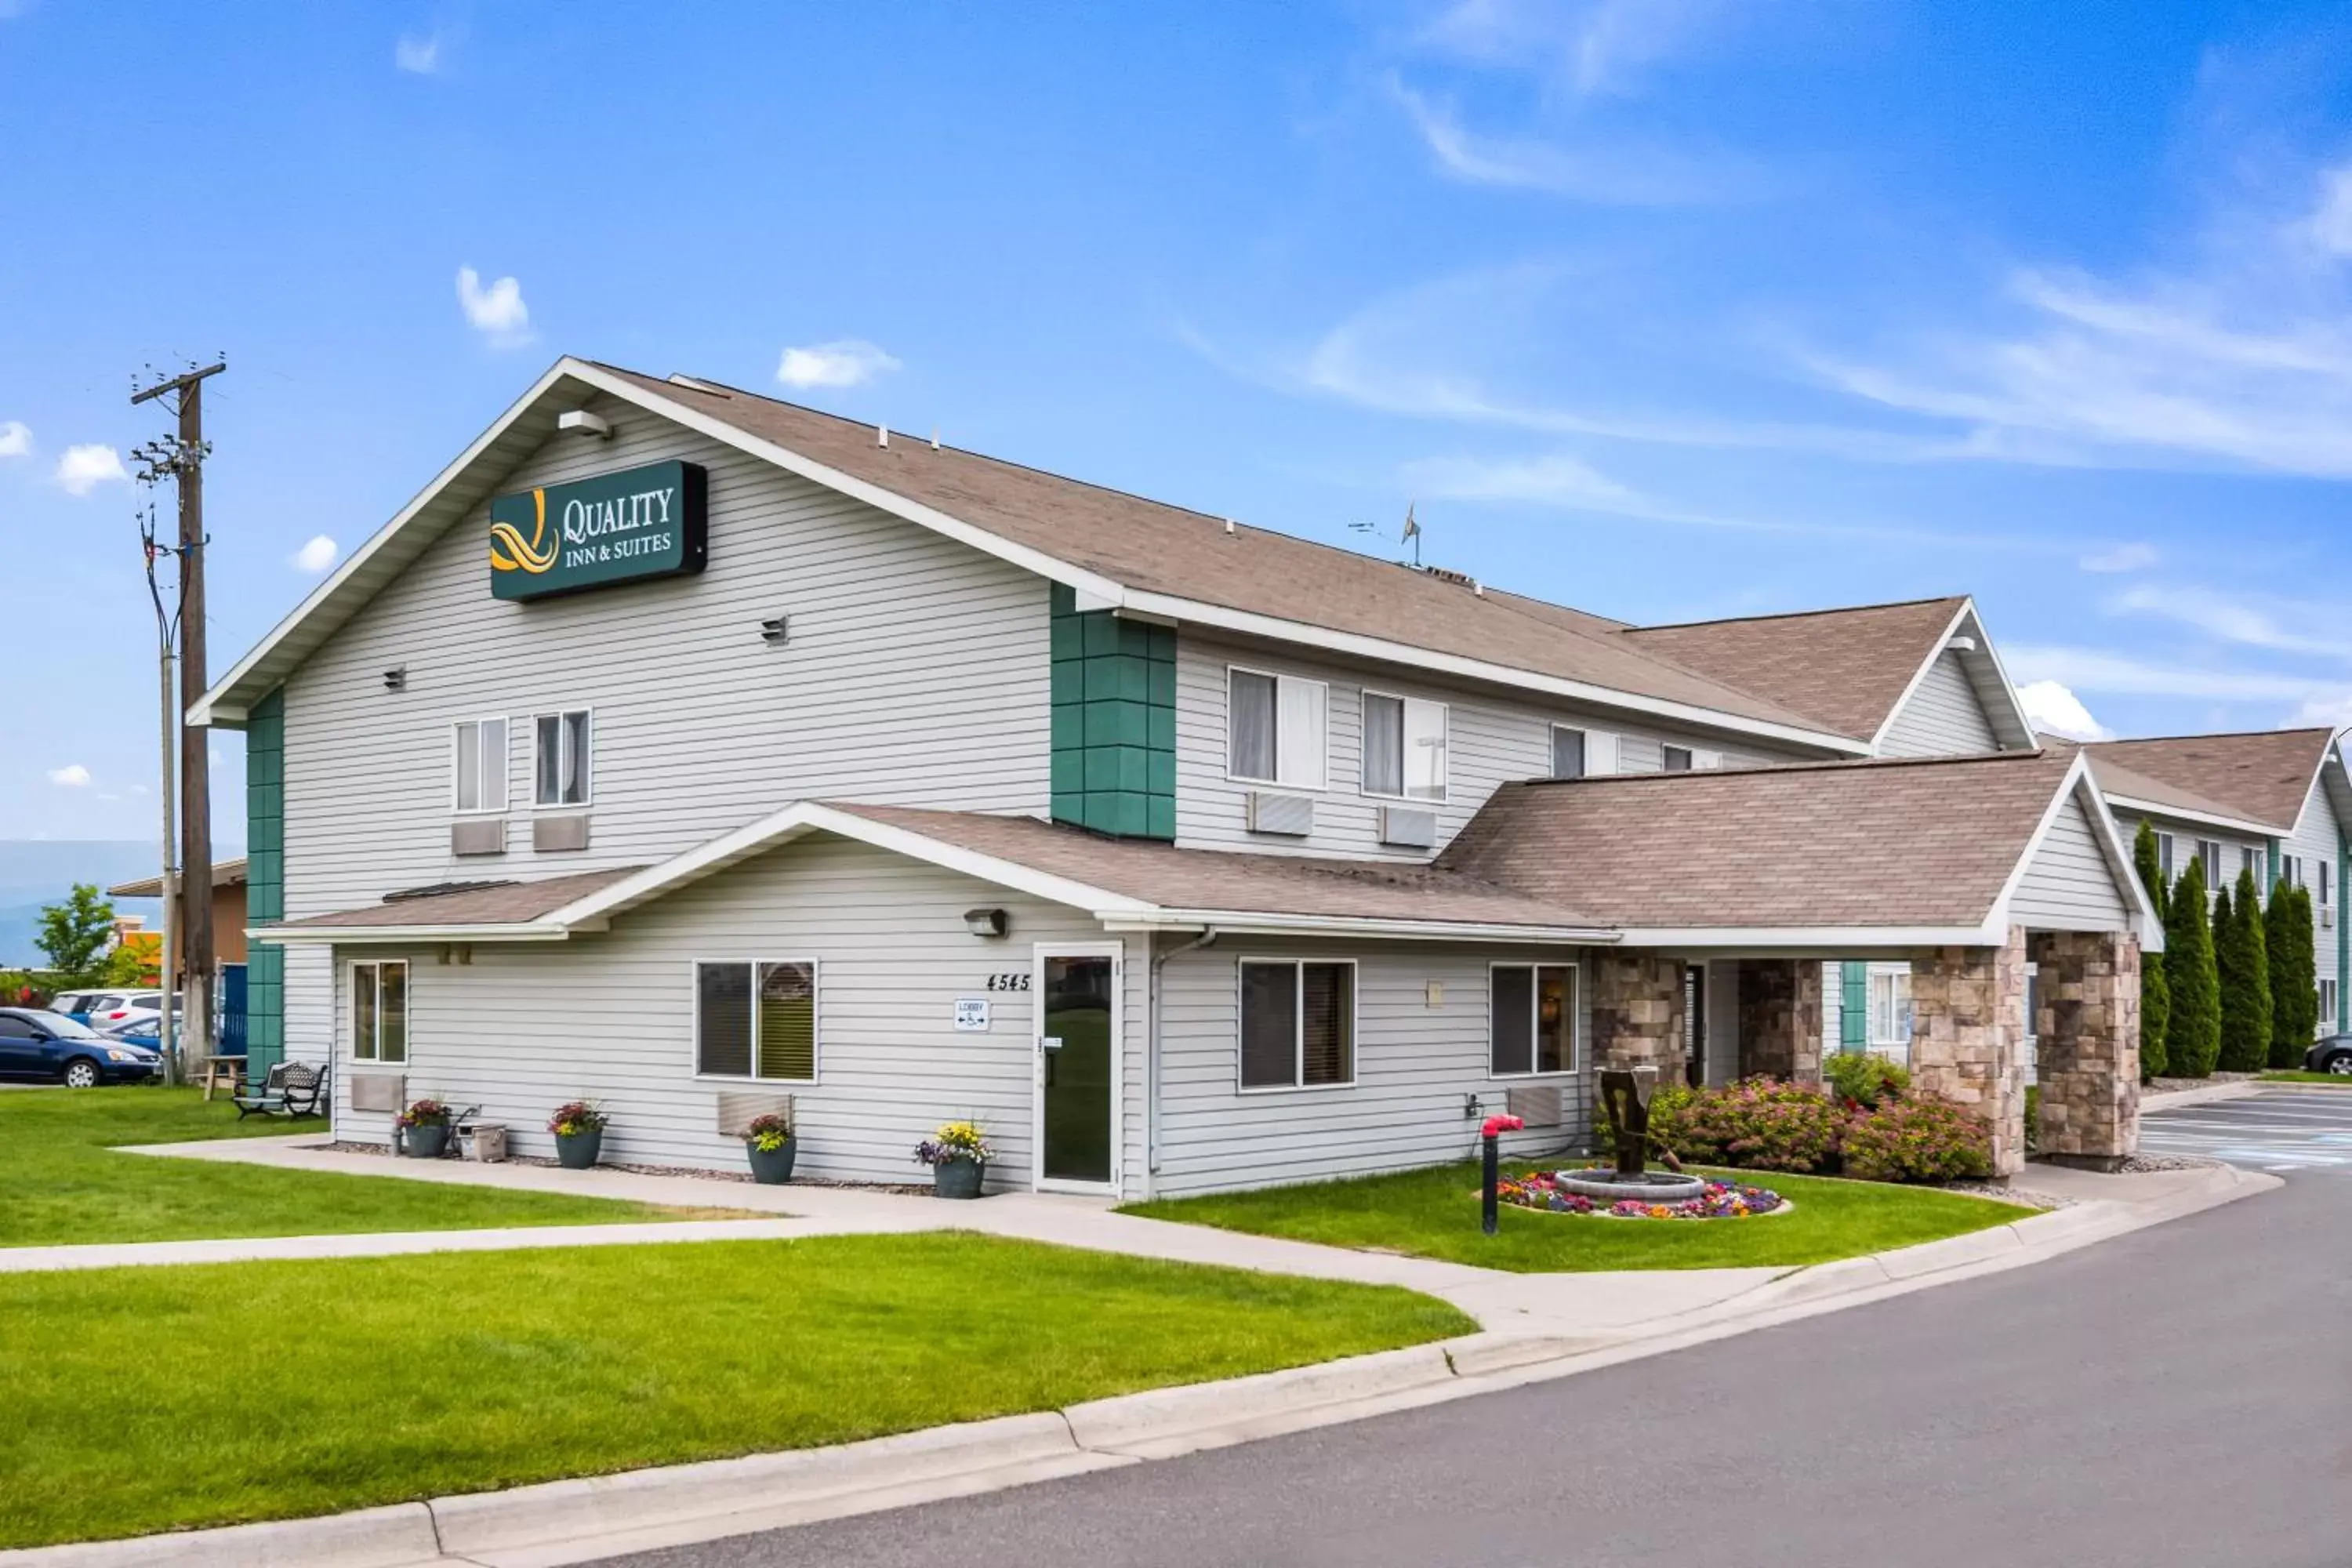 Property Building in Quality Inn & Suites Missoula